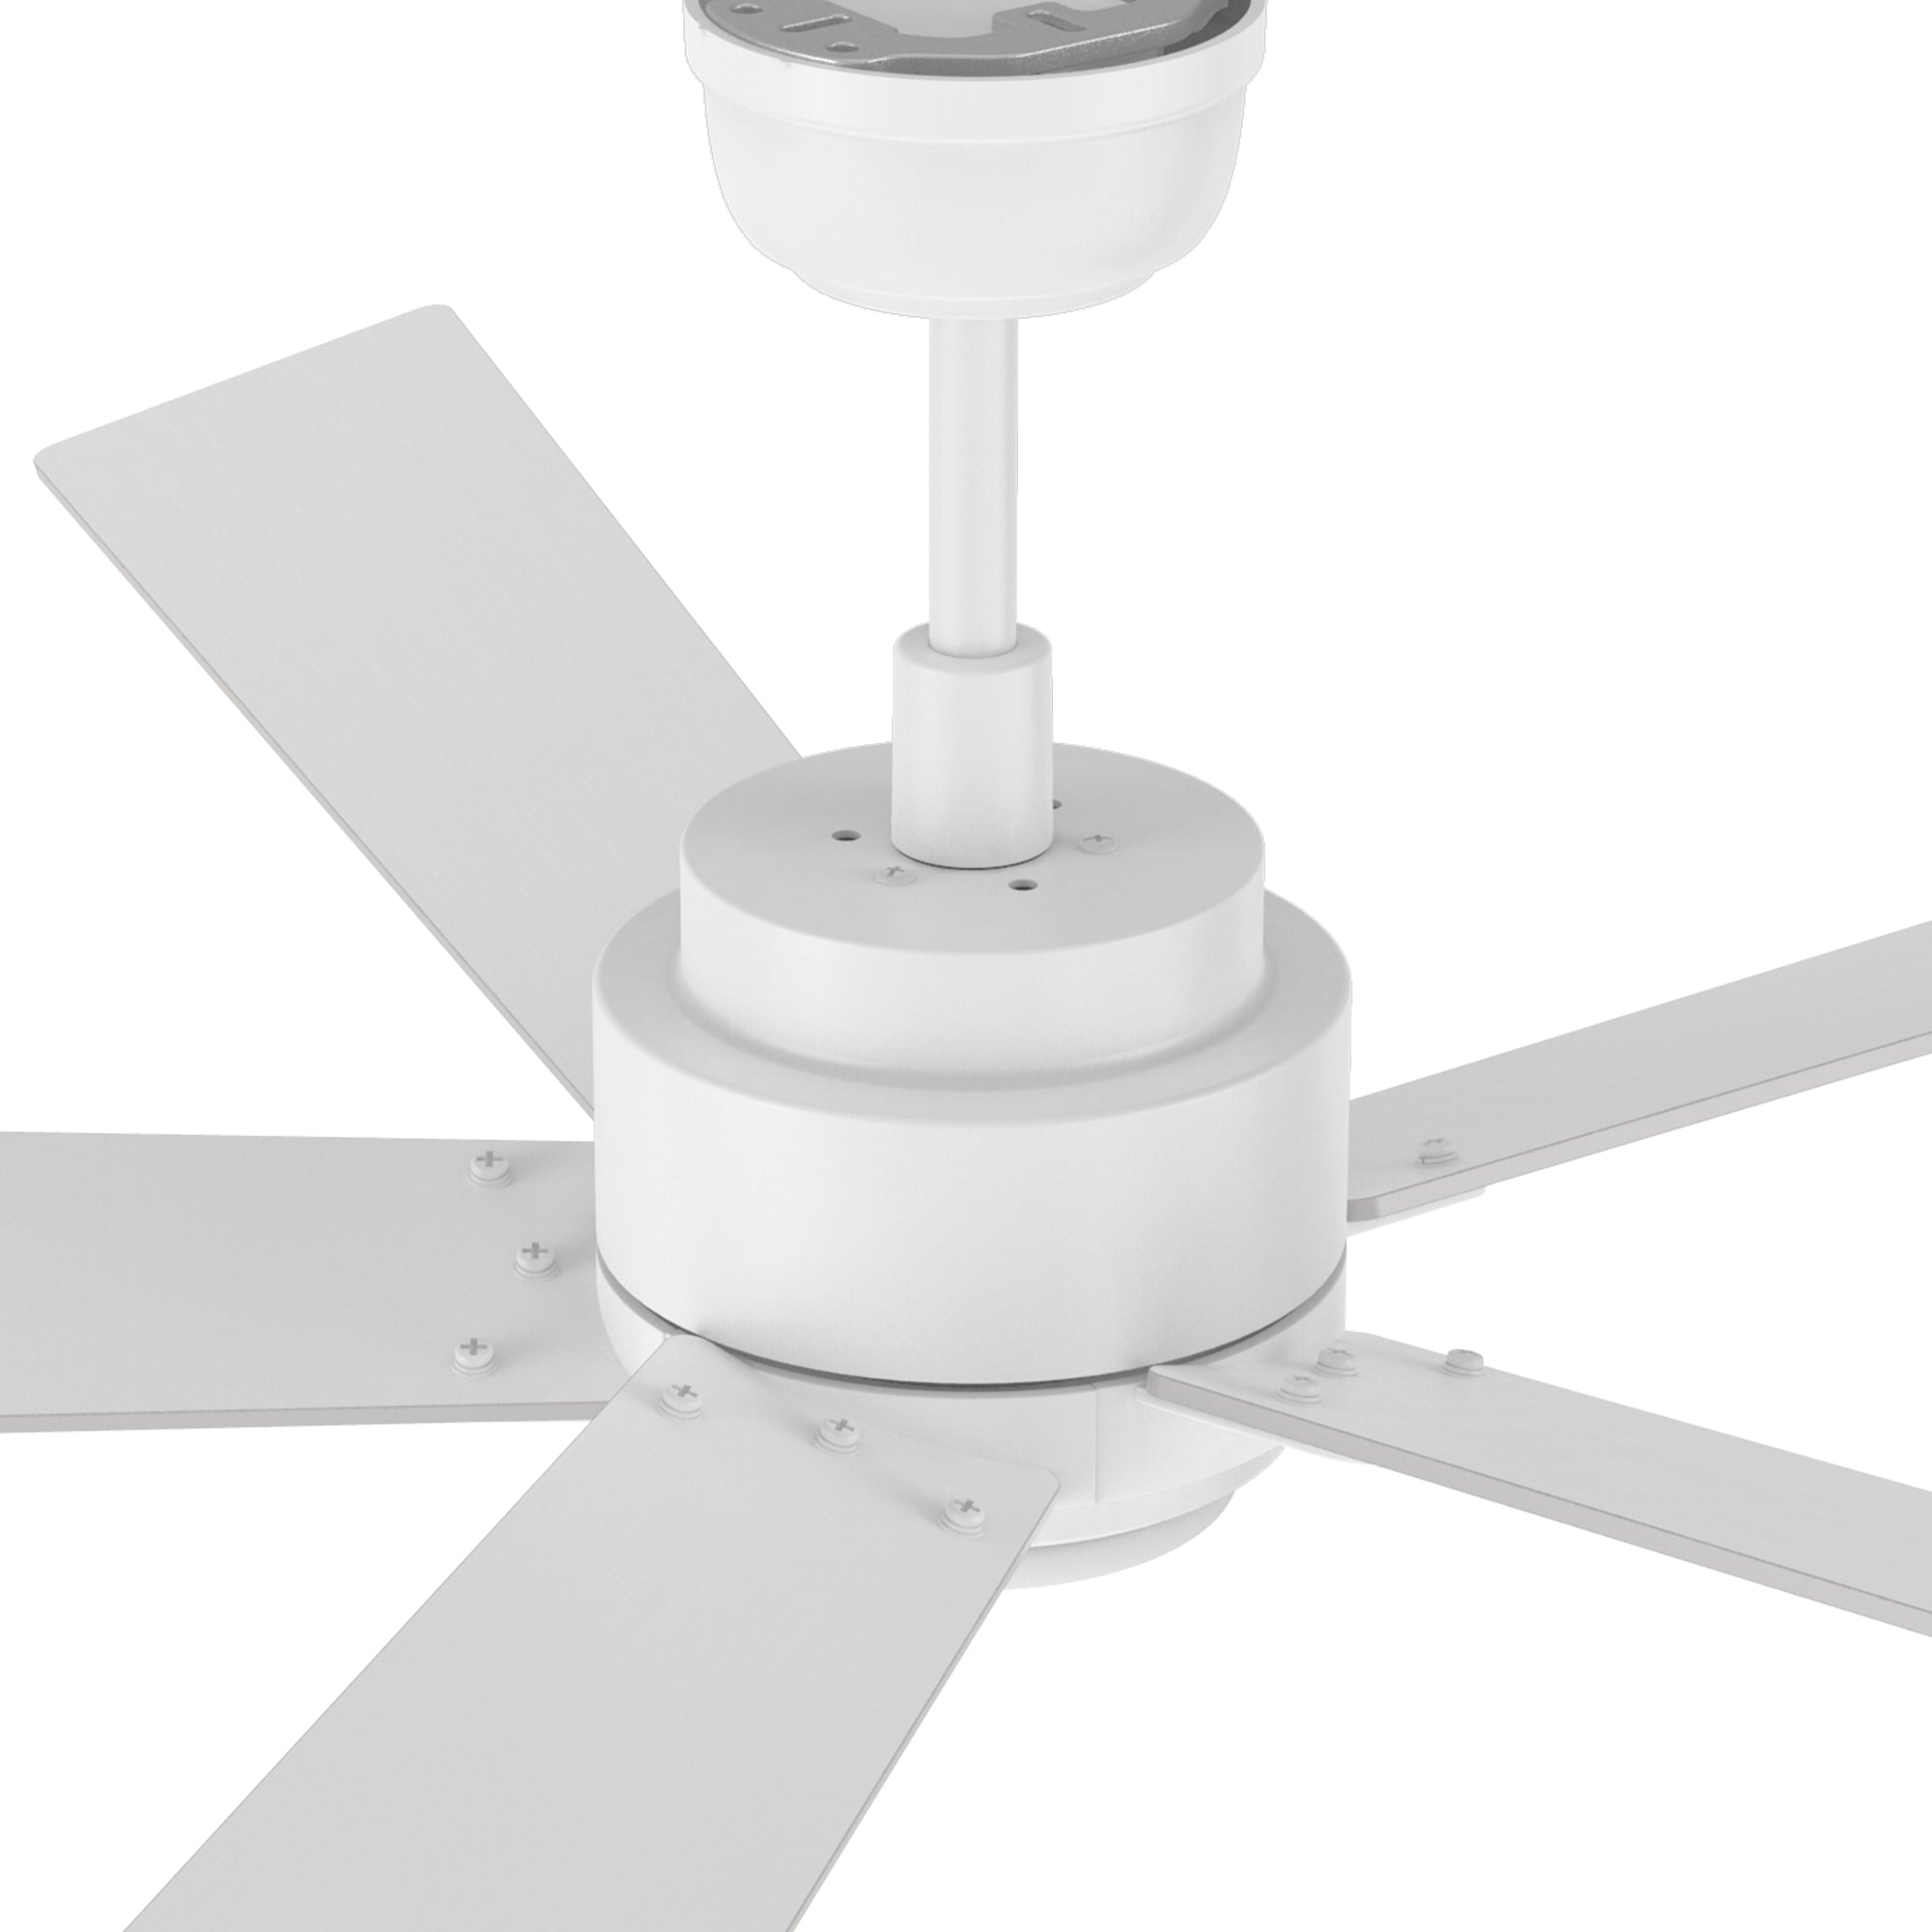 Carro Kalmar 60 inch remote control ceiling fan design with whisper-quiet 10-speed DC motor. 